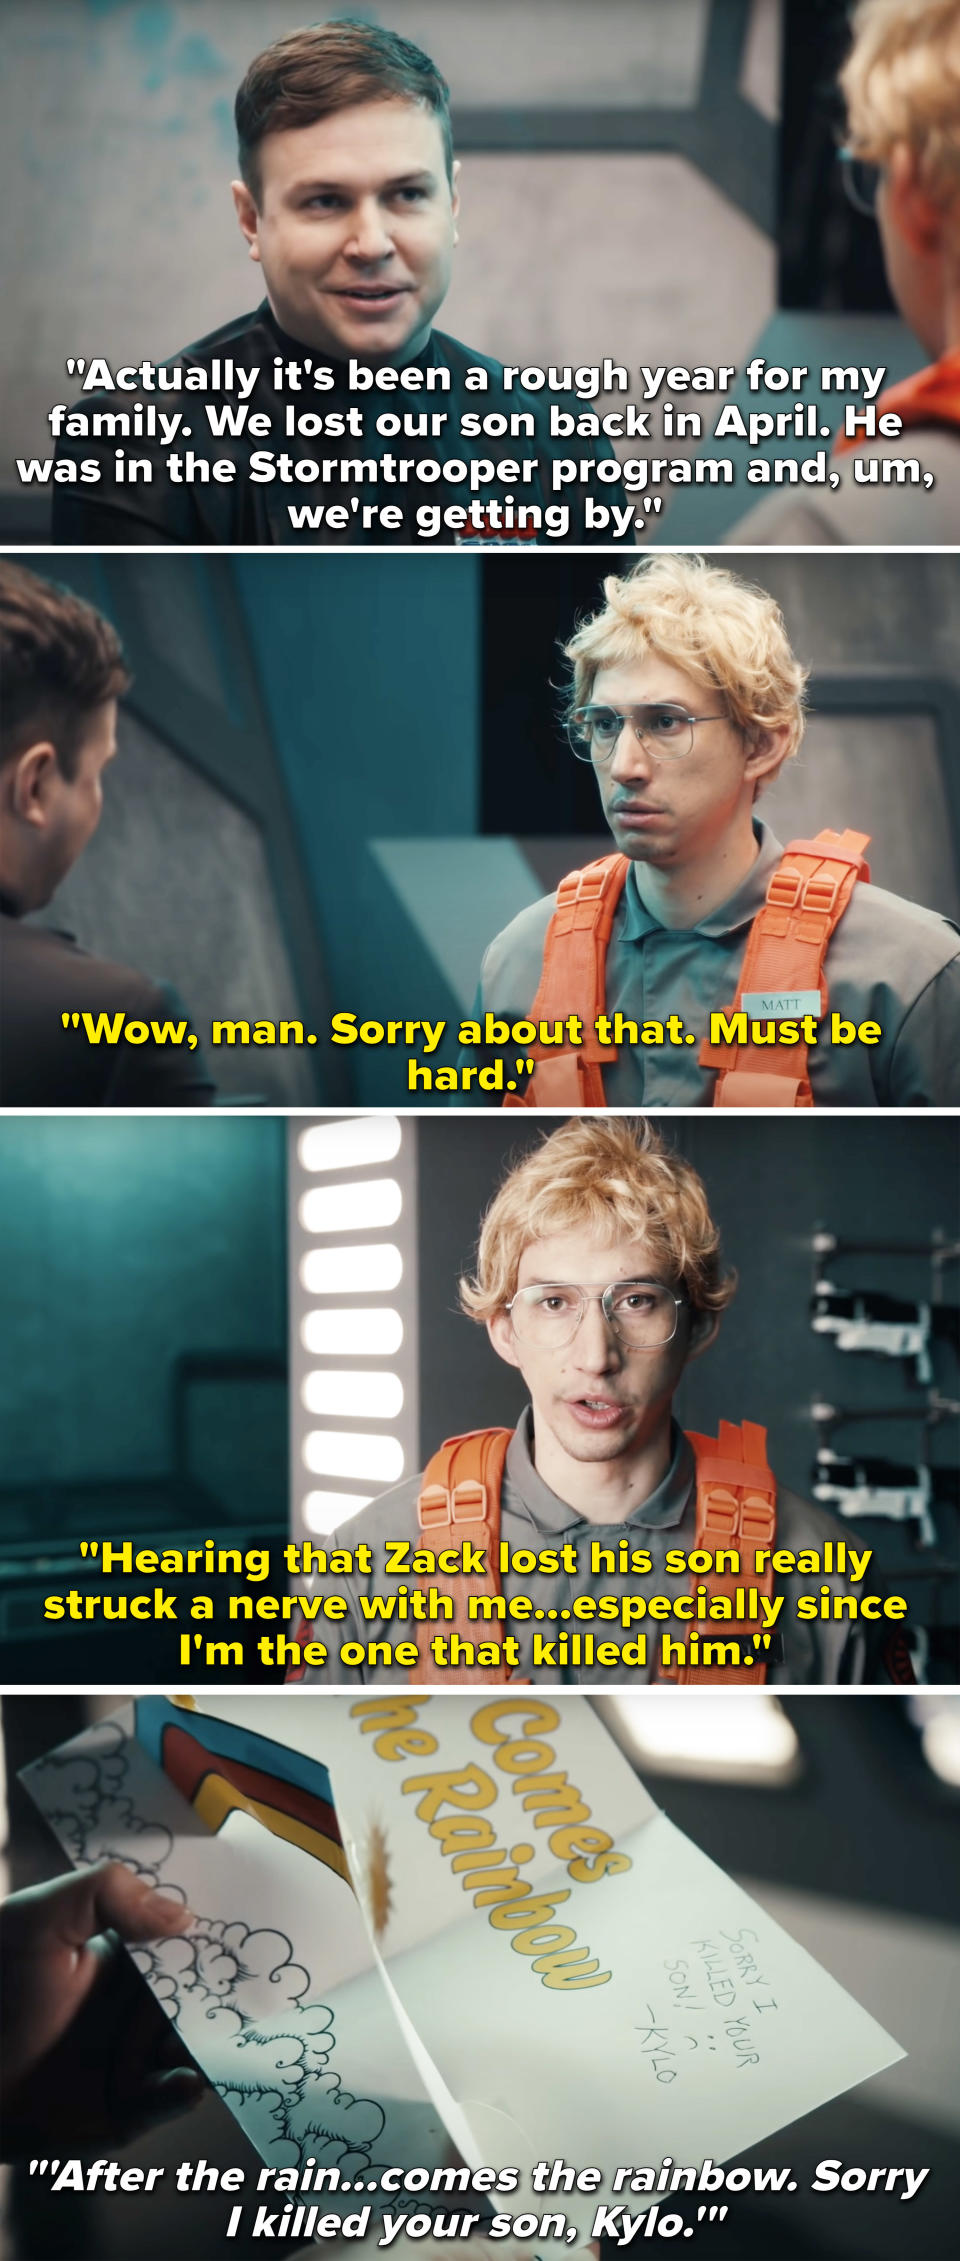 Adam in a skit saying he killed the character's son, but is sad for the dad and writes him a card that says, "after the rain comes the rainbow, sorry I killed your son, Kylo"